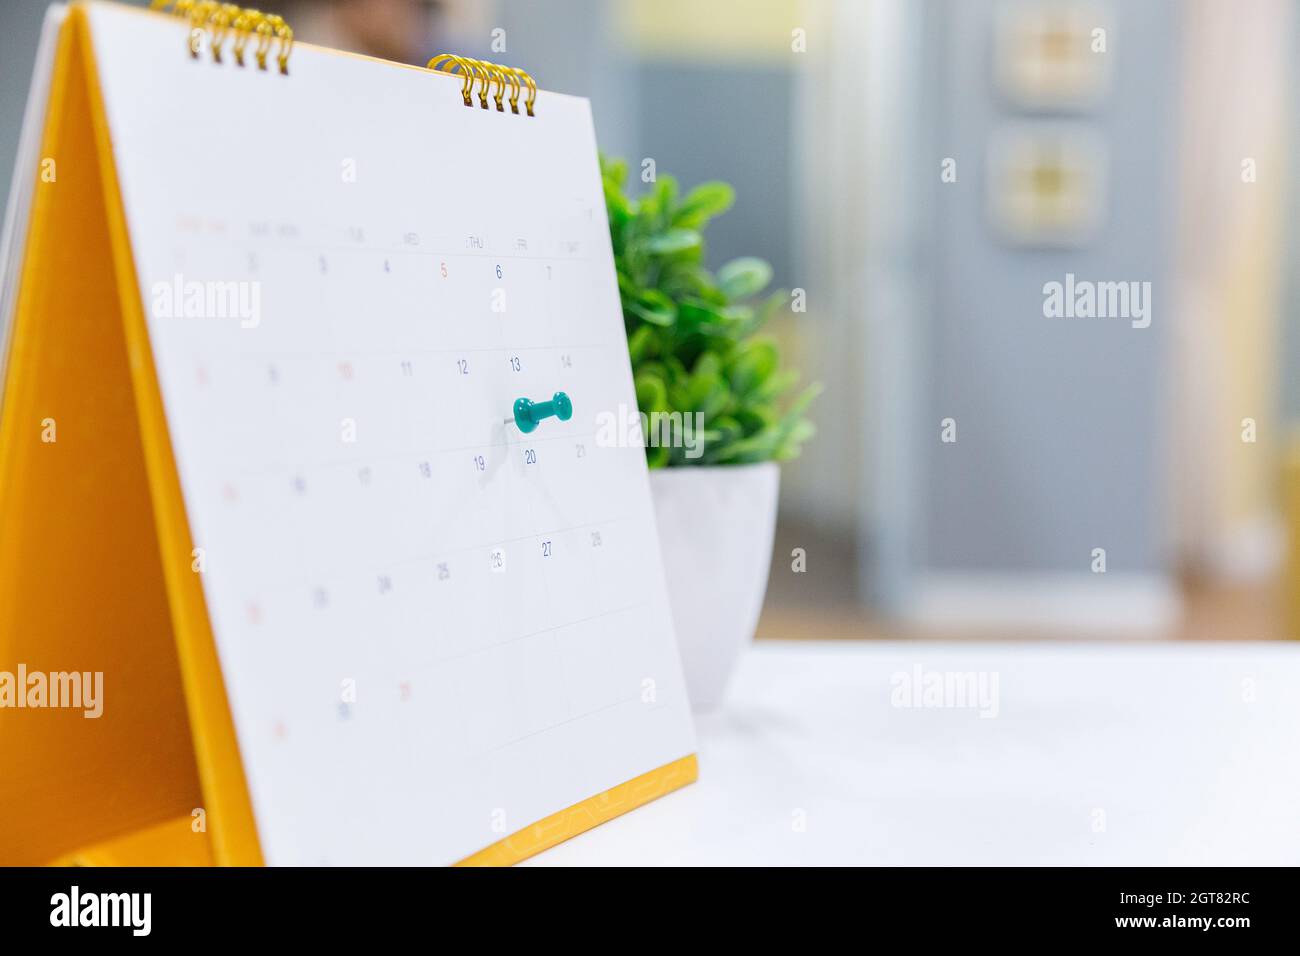 Calendar Event Planner Is Busy.calendar,clock To Set Timetable Organize Schedule,planning Stock Photo